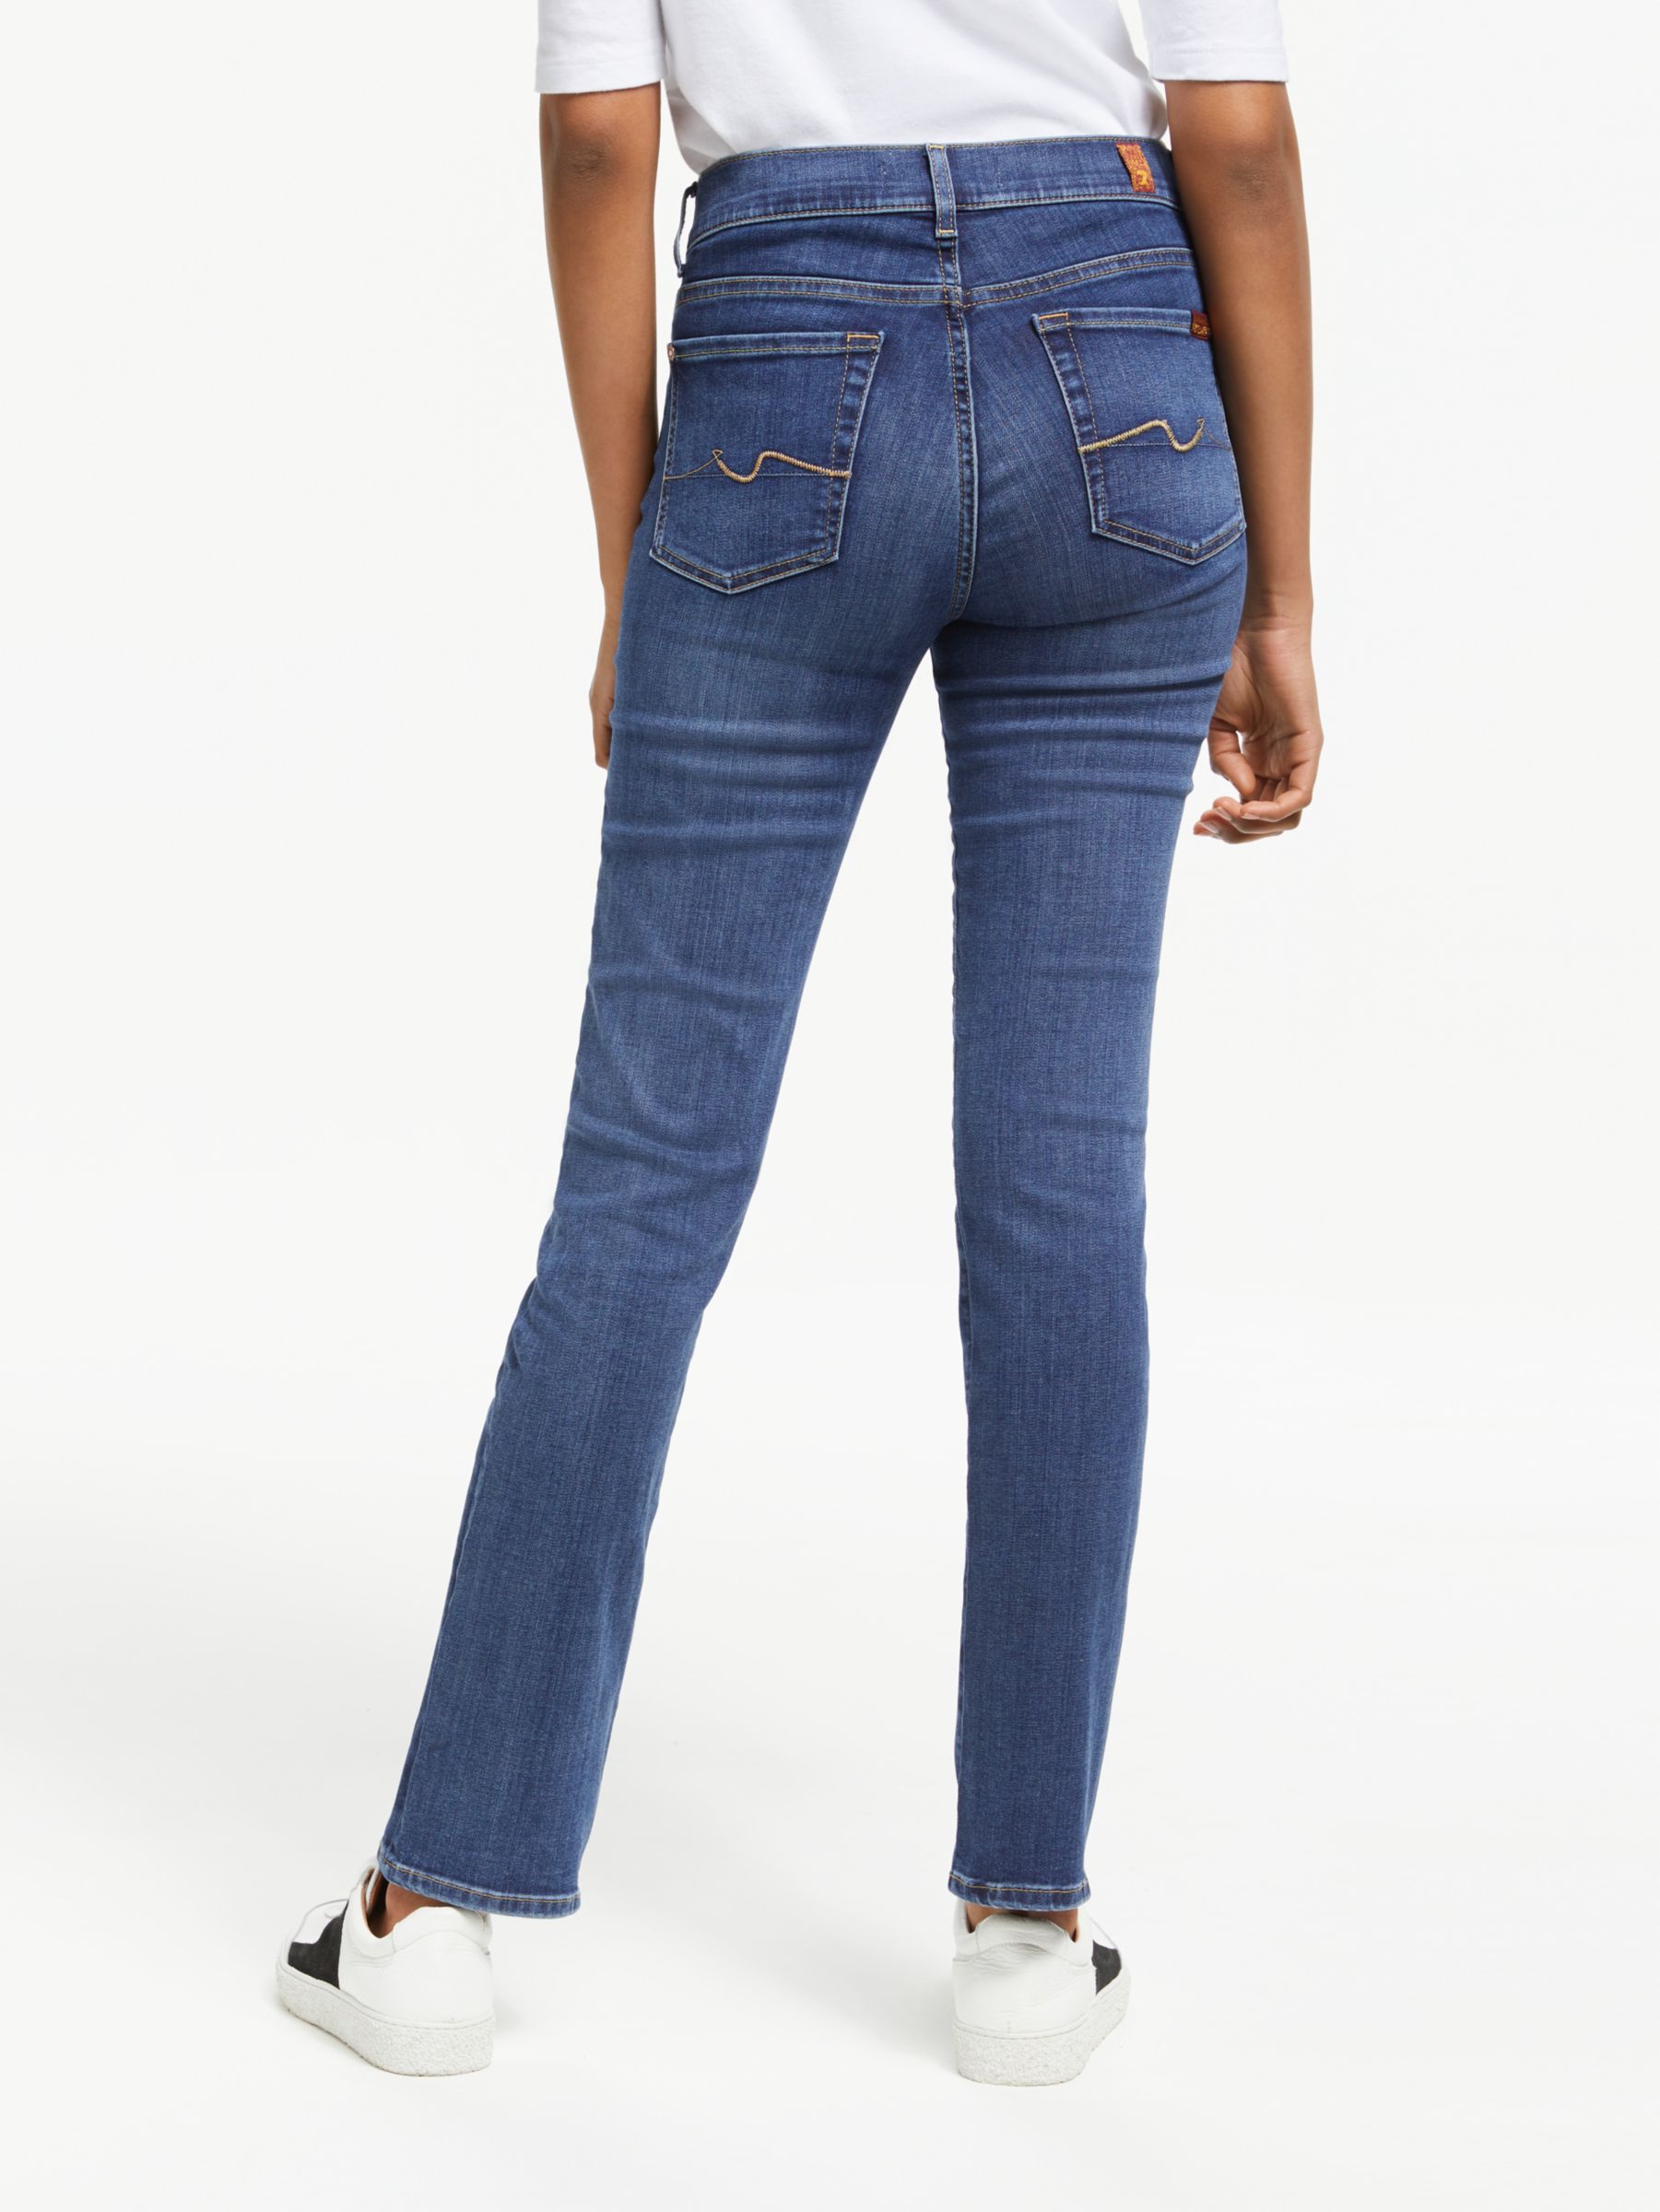 7 For All Mankind B(air) Straight Leg Jeans, Vintage Dusk at John Lewis ...